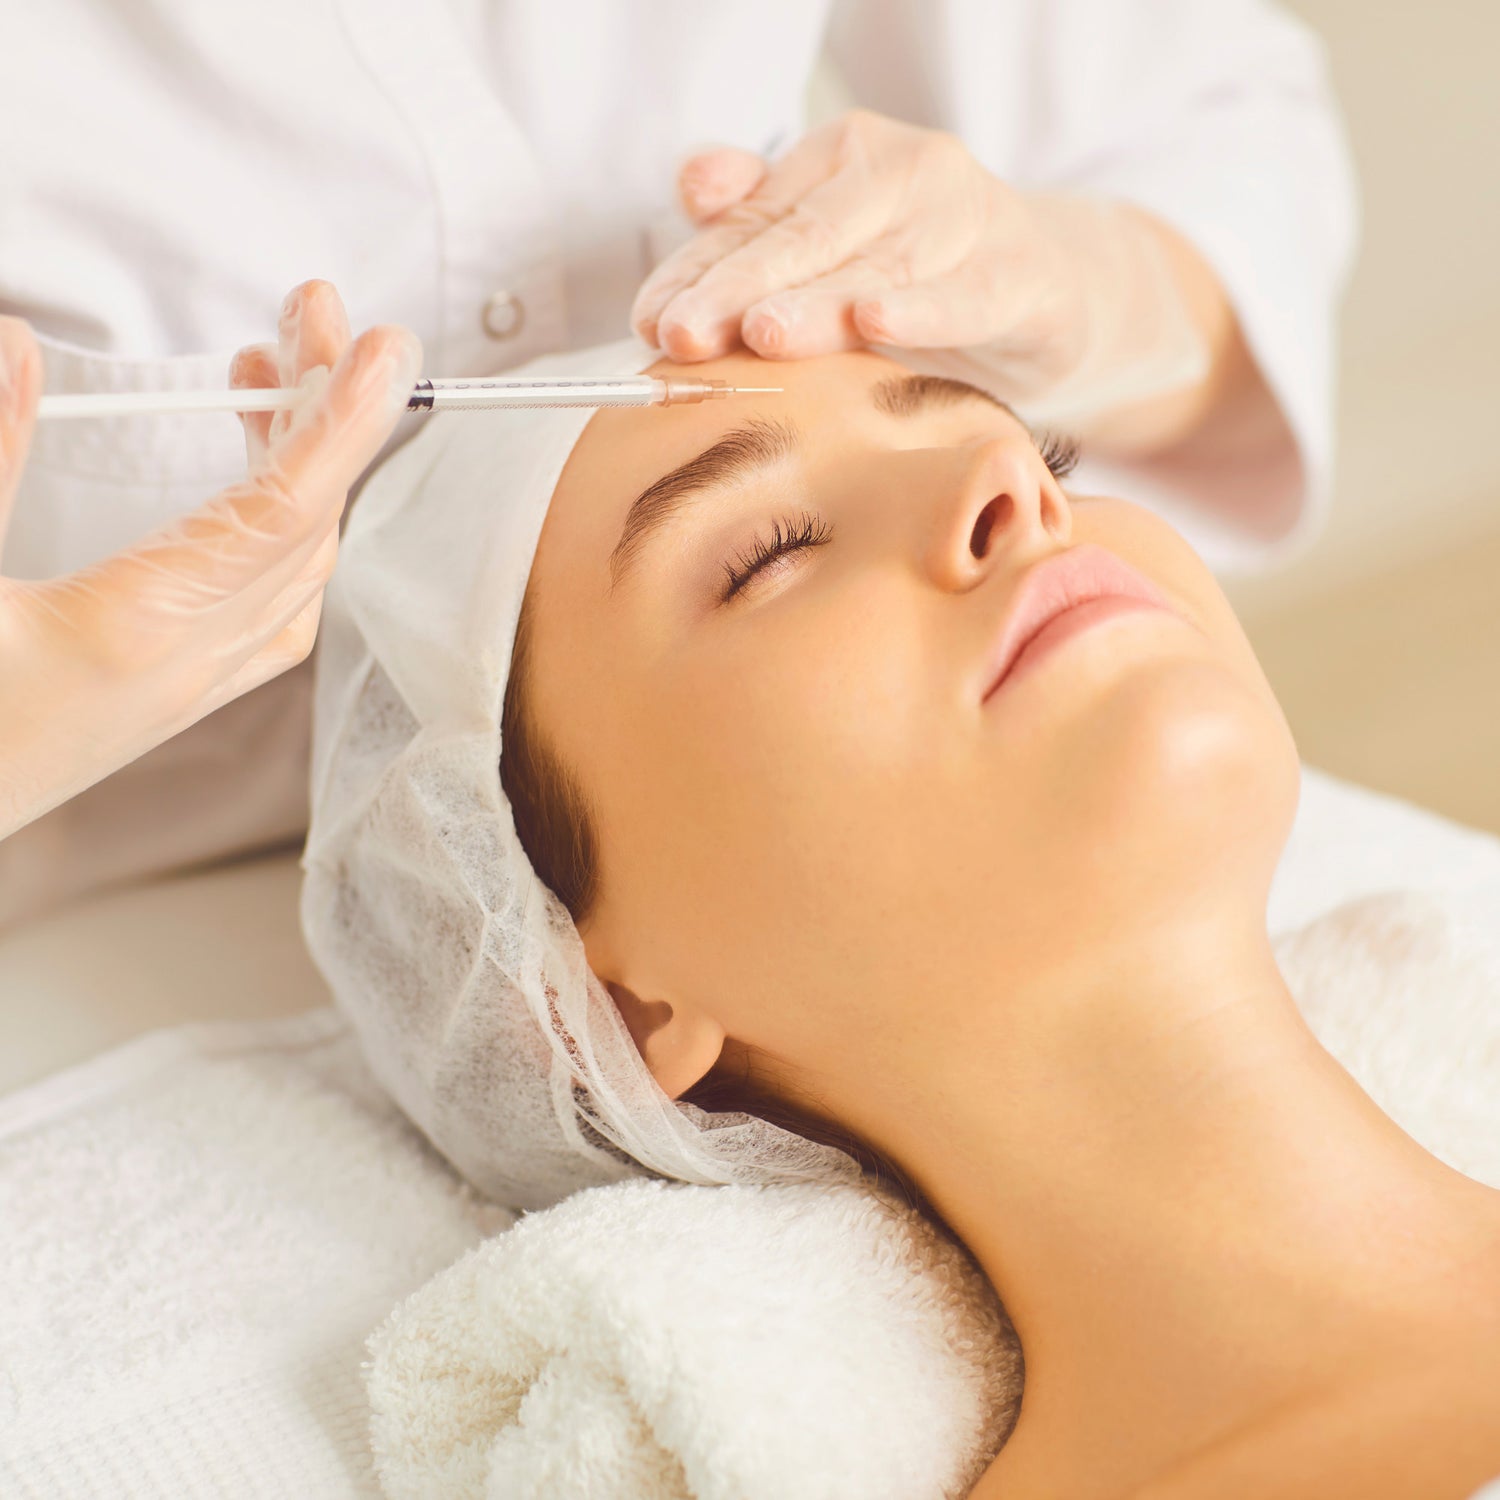 woman wearing white gloves putting dermal filler in someone's forehead